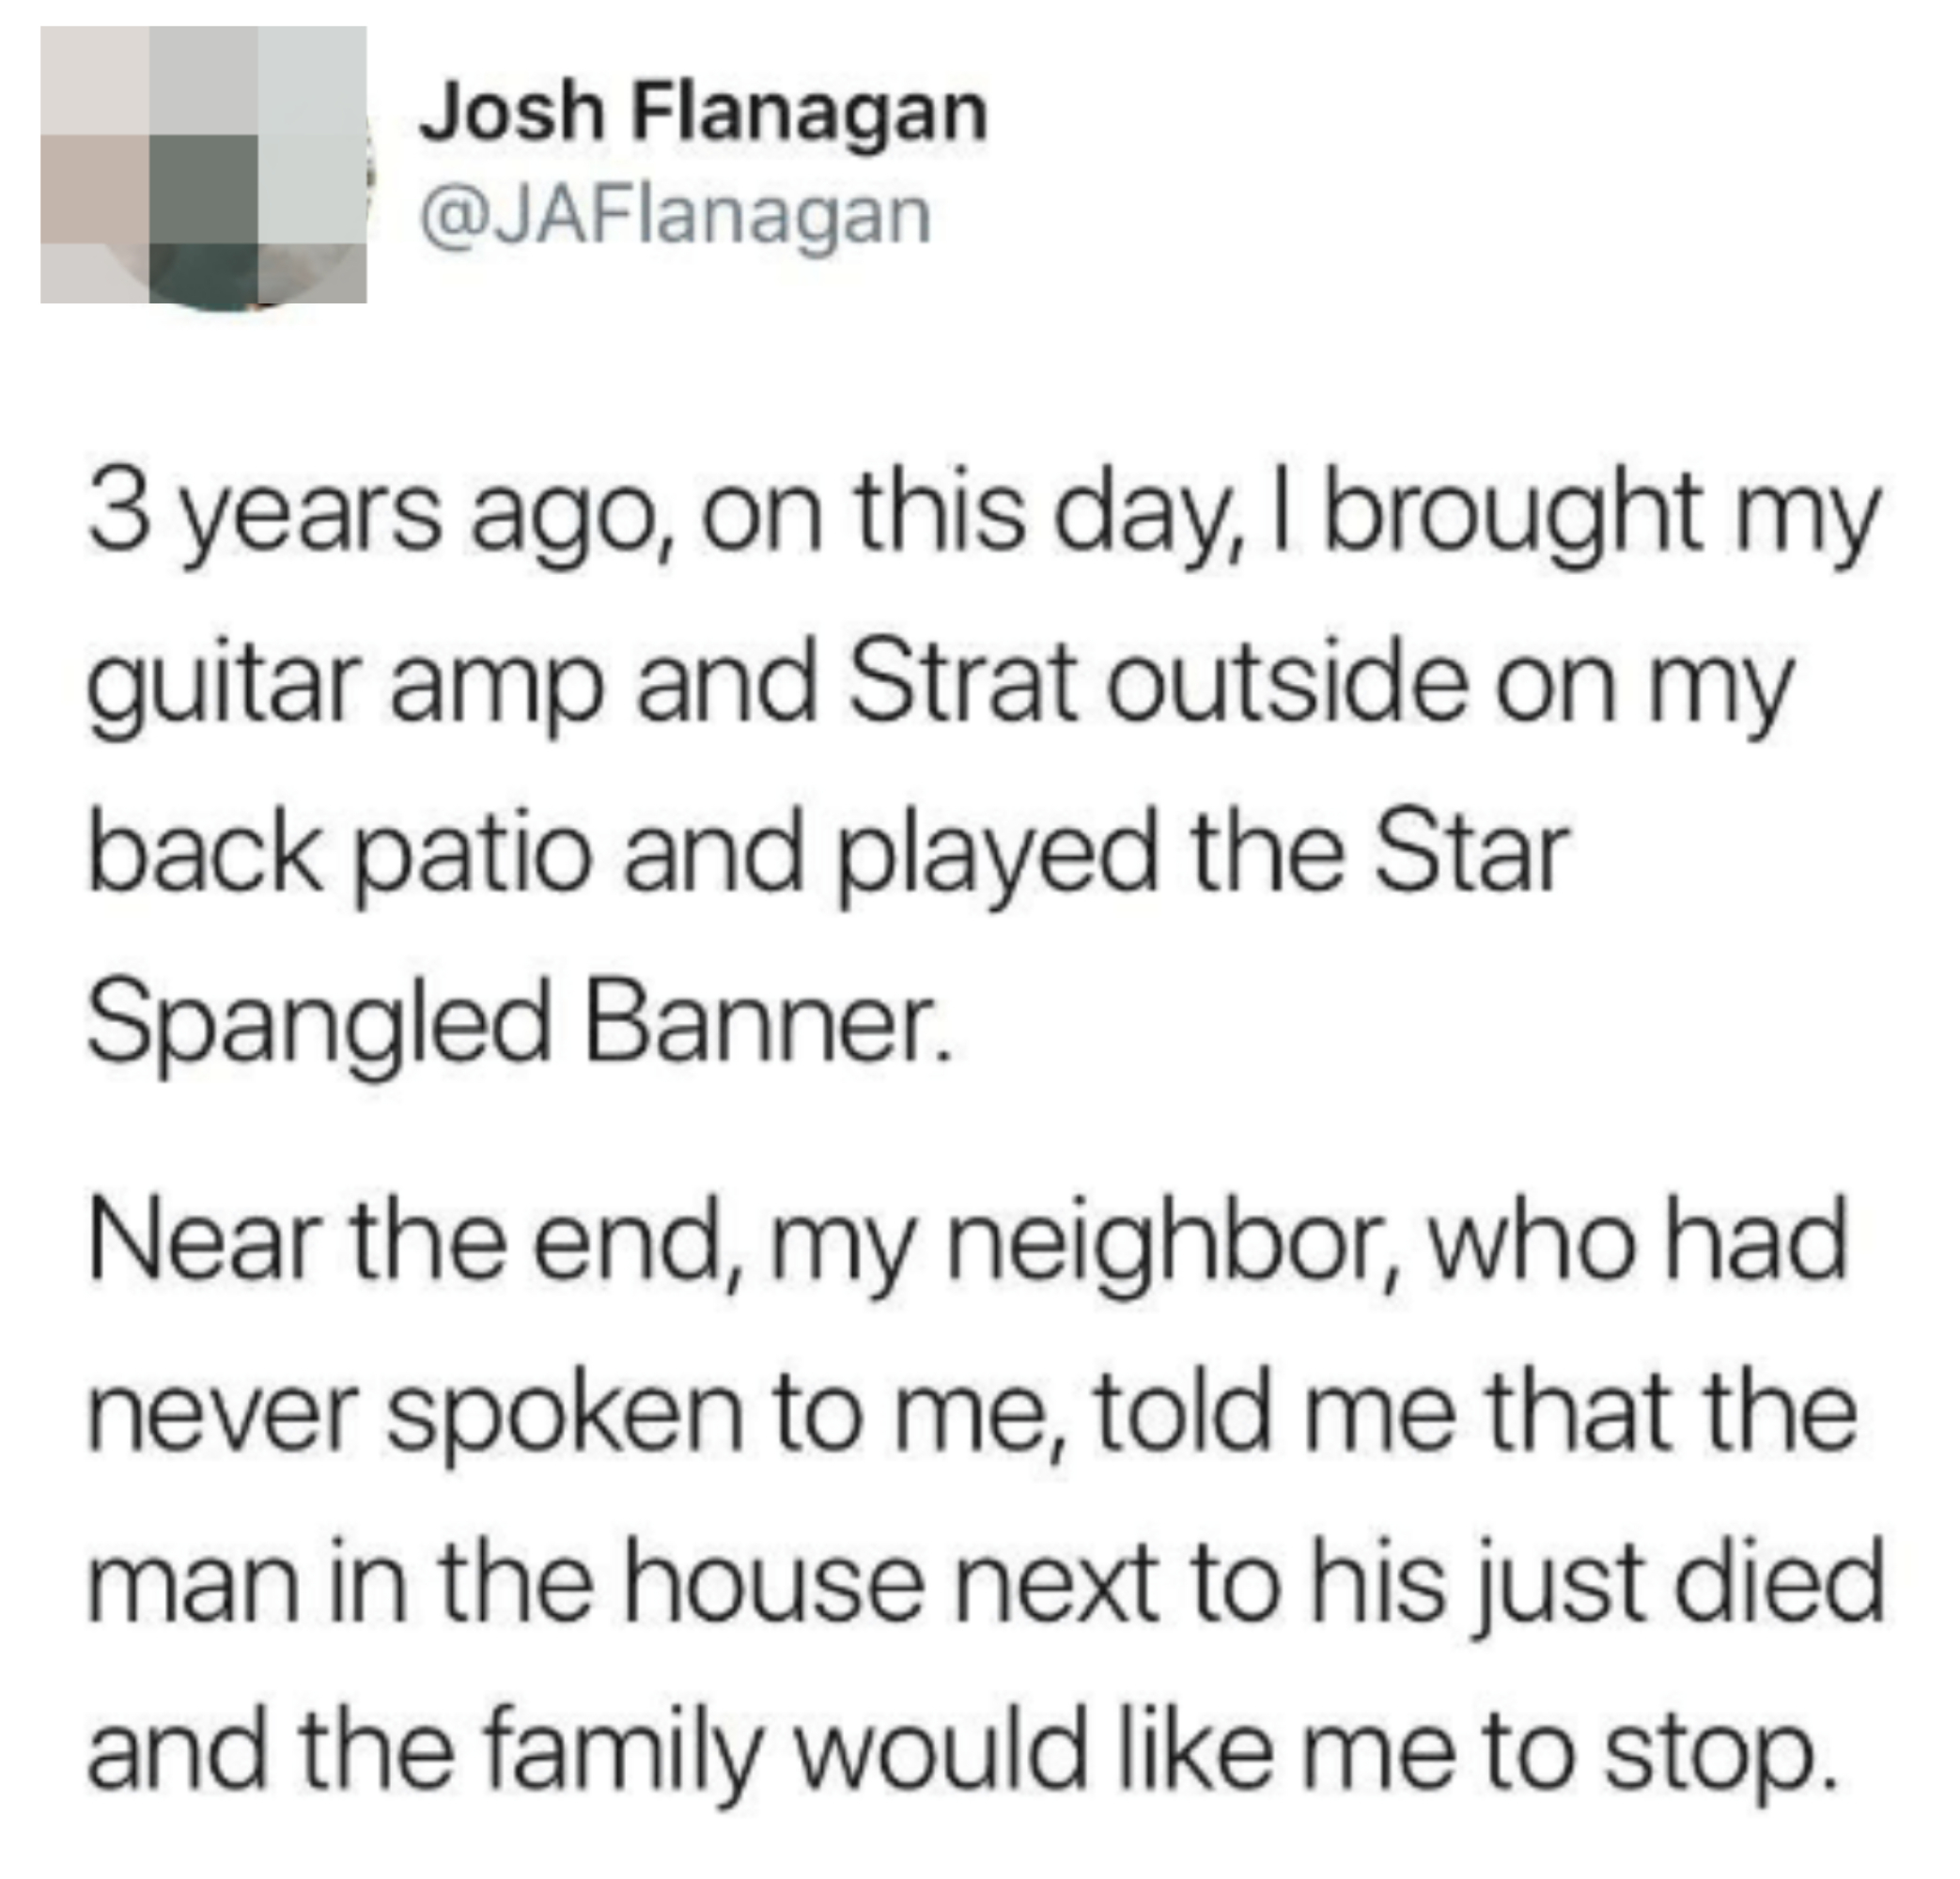 Tweet about someone recalling how they unknowingly played guitar loudly on their patio while a neighbor was grieving a loved one